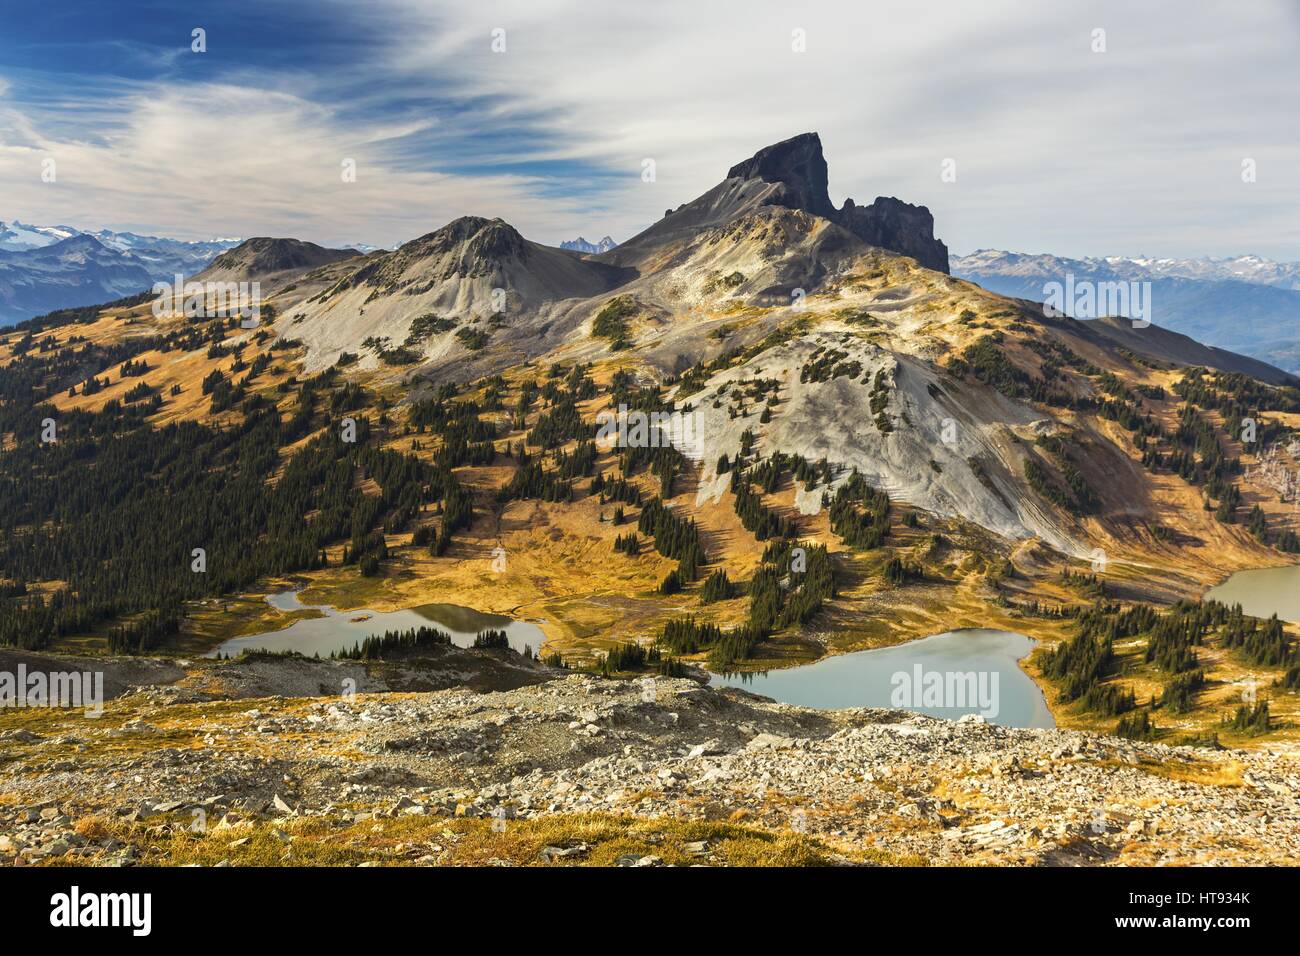 Black Tusk Mountain Top and Scenic Landscape on Great Summer Hiking Trail to Panorama Ridge in Coast Mountains of British Columbia Canada Stock Photo